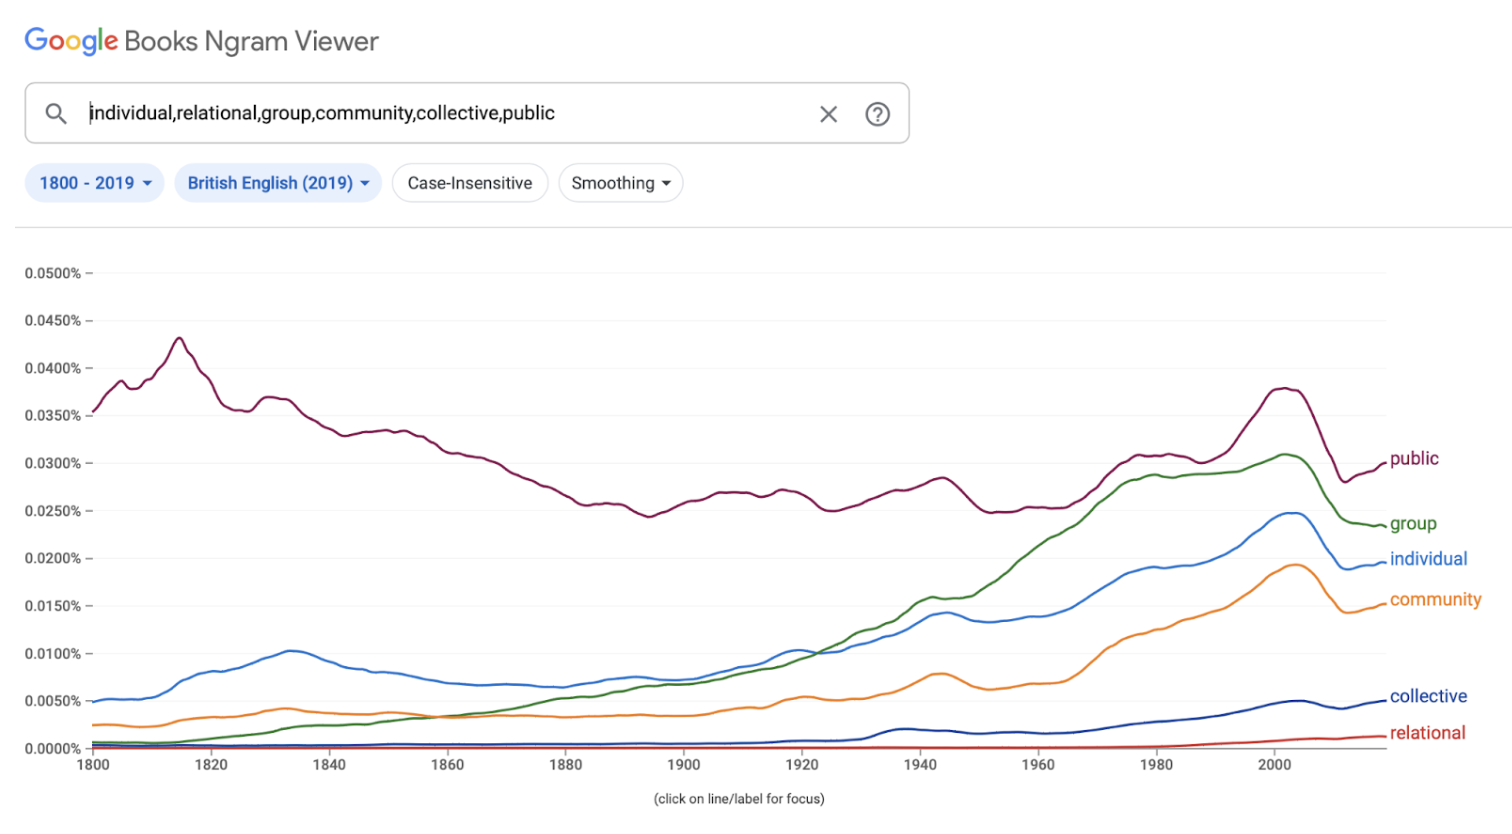 Google NGRAMs viewer comparison for individual, relational, group, community, collective and public, showing public and group as the most used terms, and collective and relational as the least used.